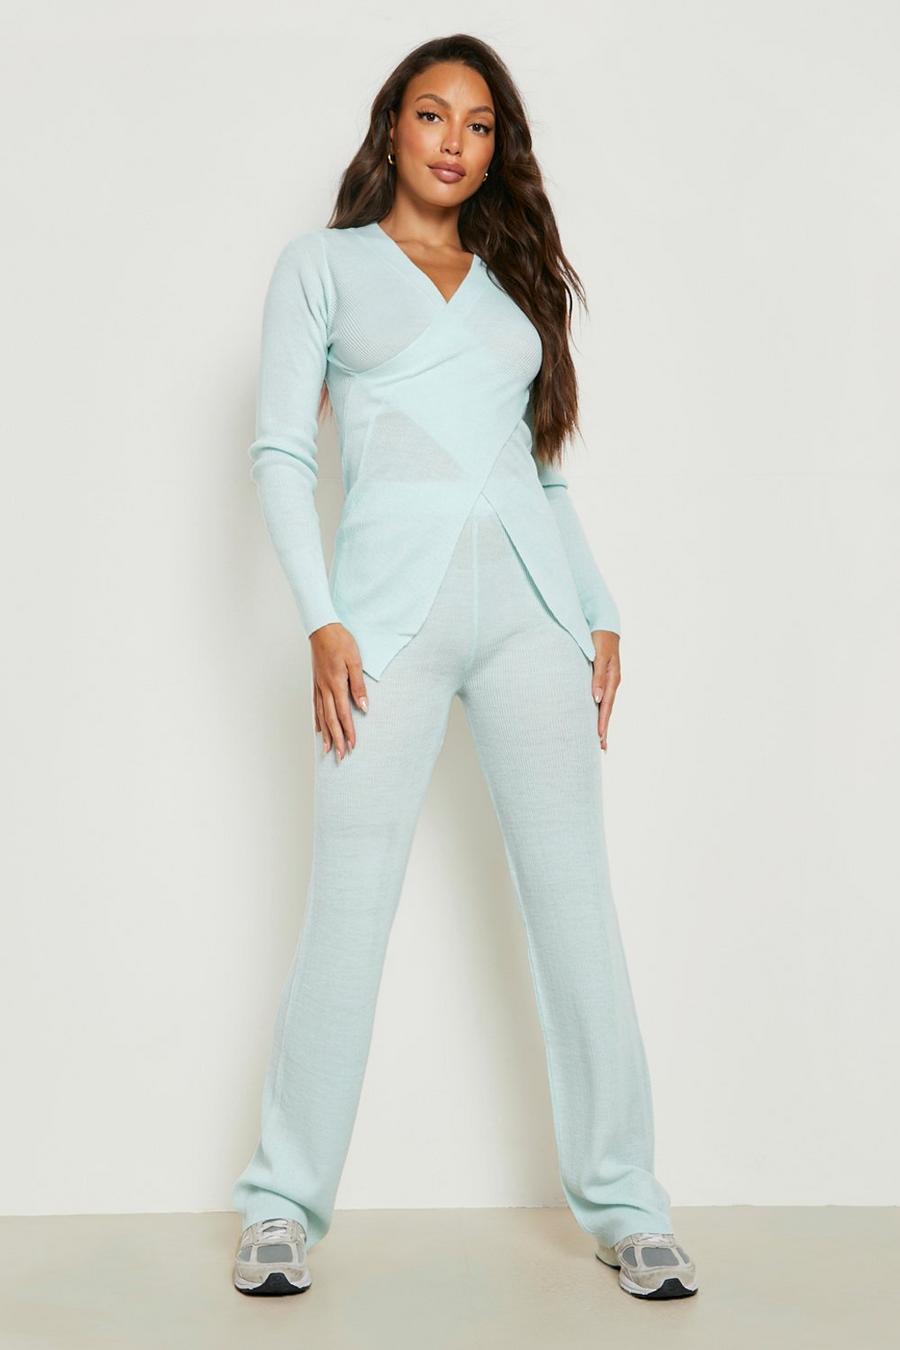 Aqua blue Tall Knitted Wrap Sweater And Pants Two-Piece